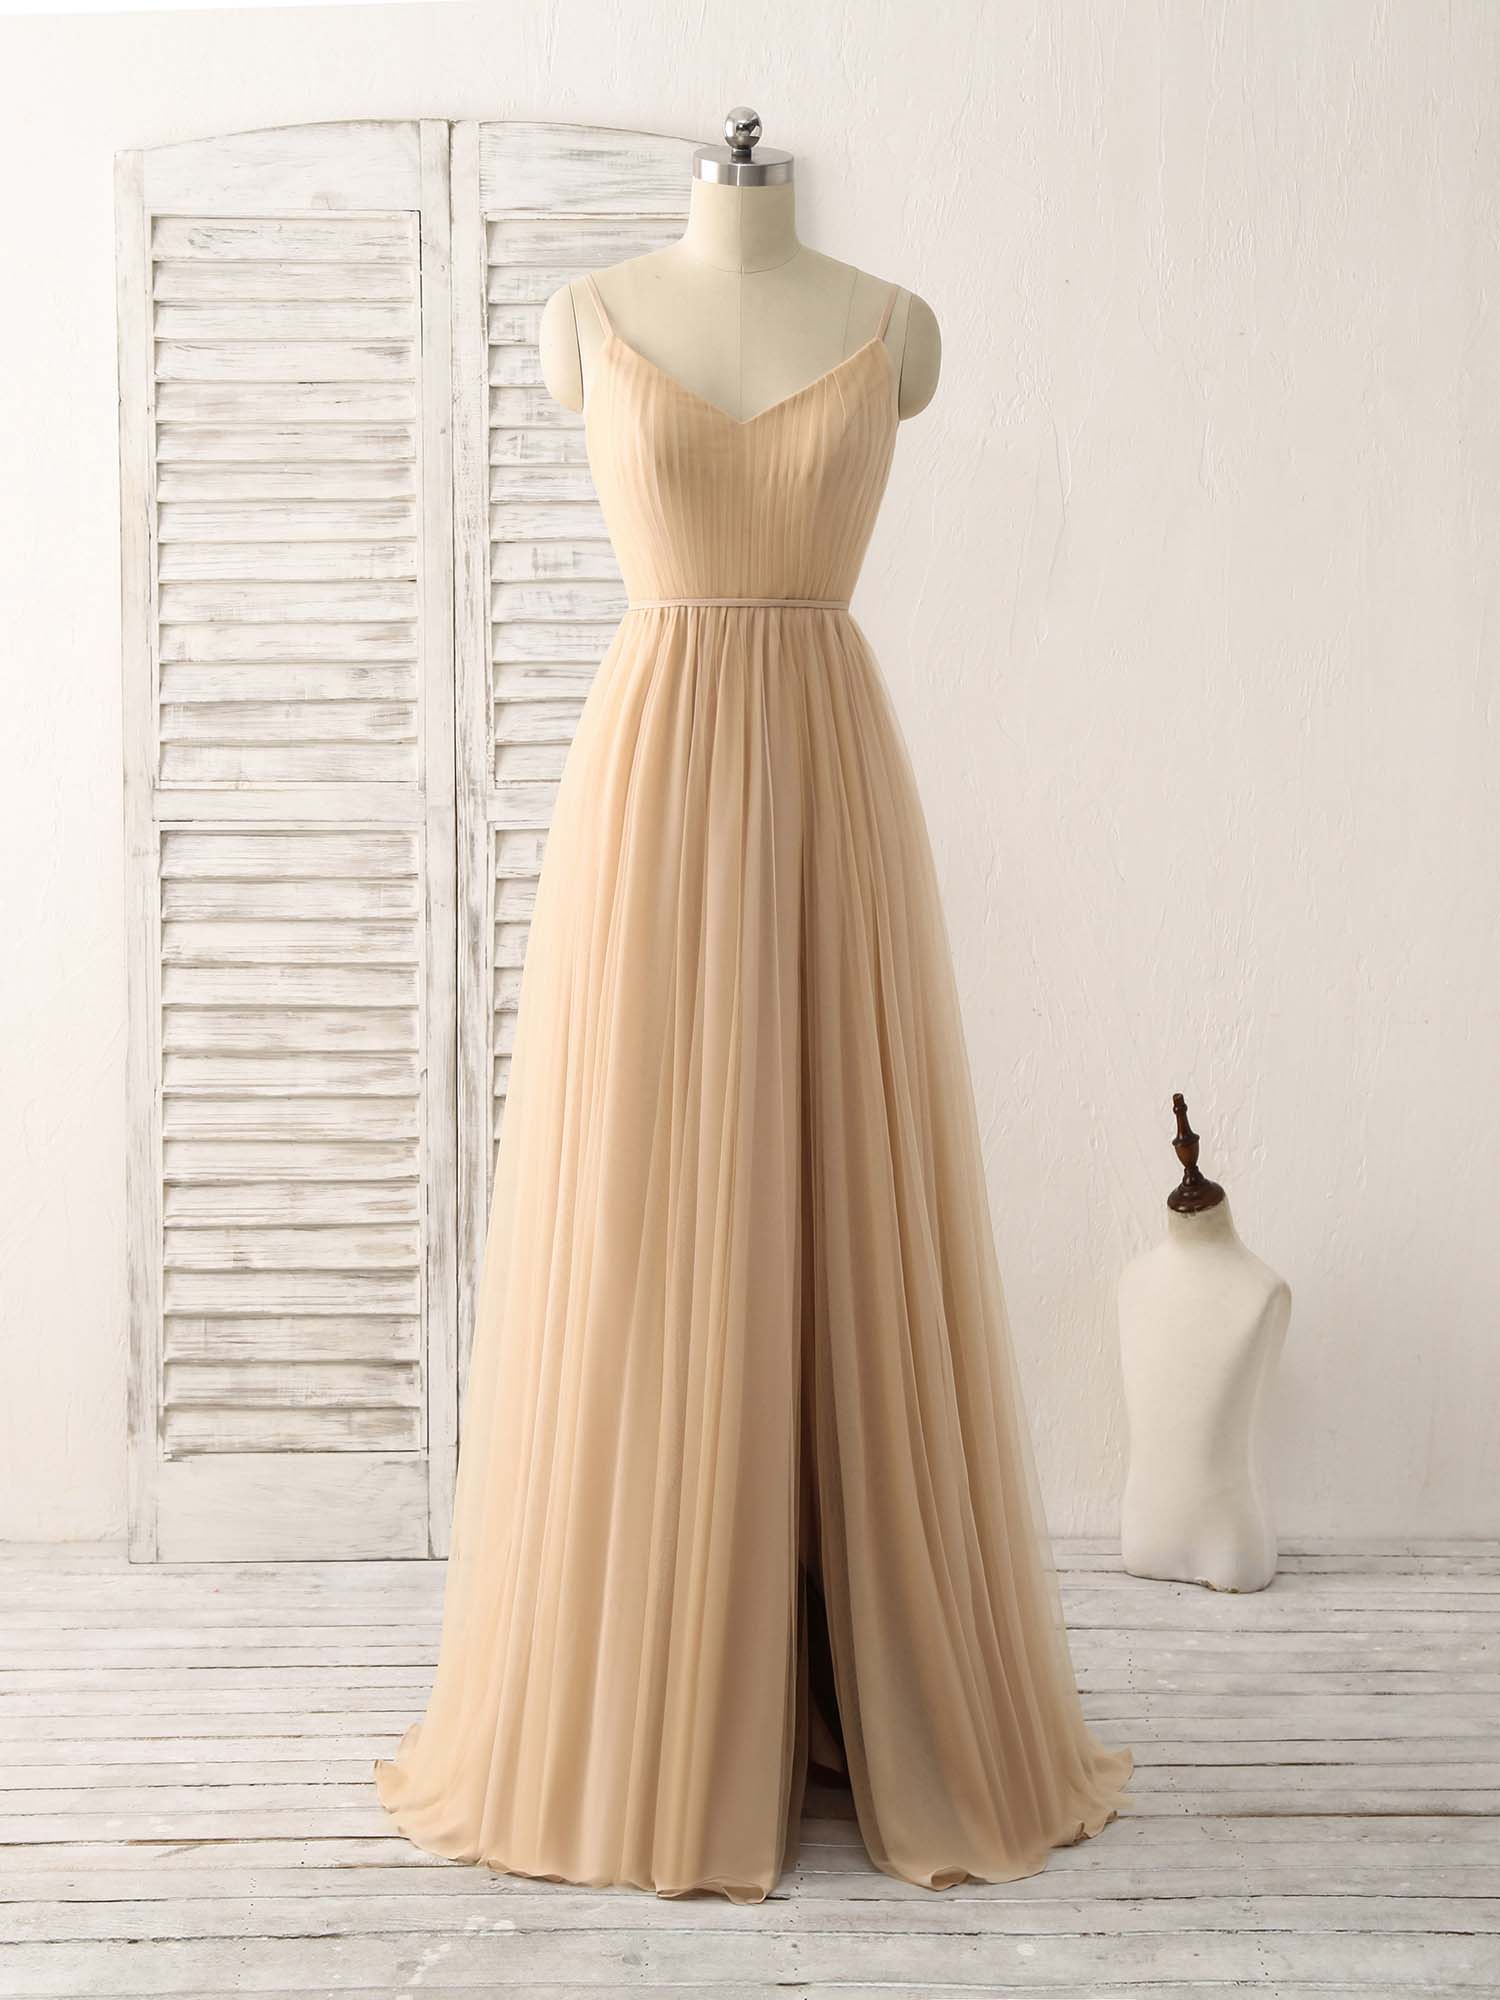 Simple V Neck Tulle Chiffon Long Corset Prom Dress Champagne Corset Bridesmaid Dress outfit, Modest Prom Dress